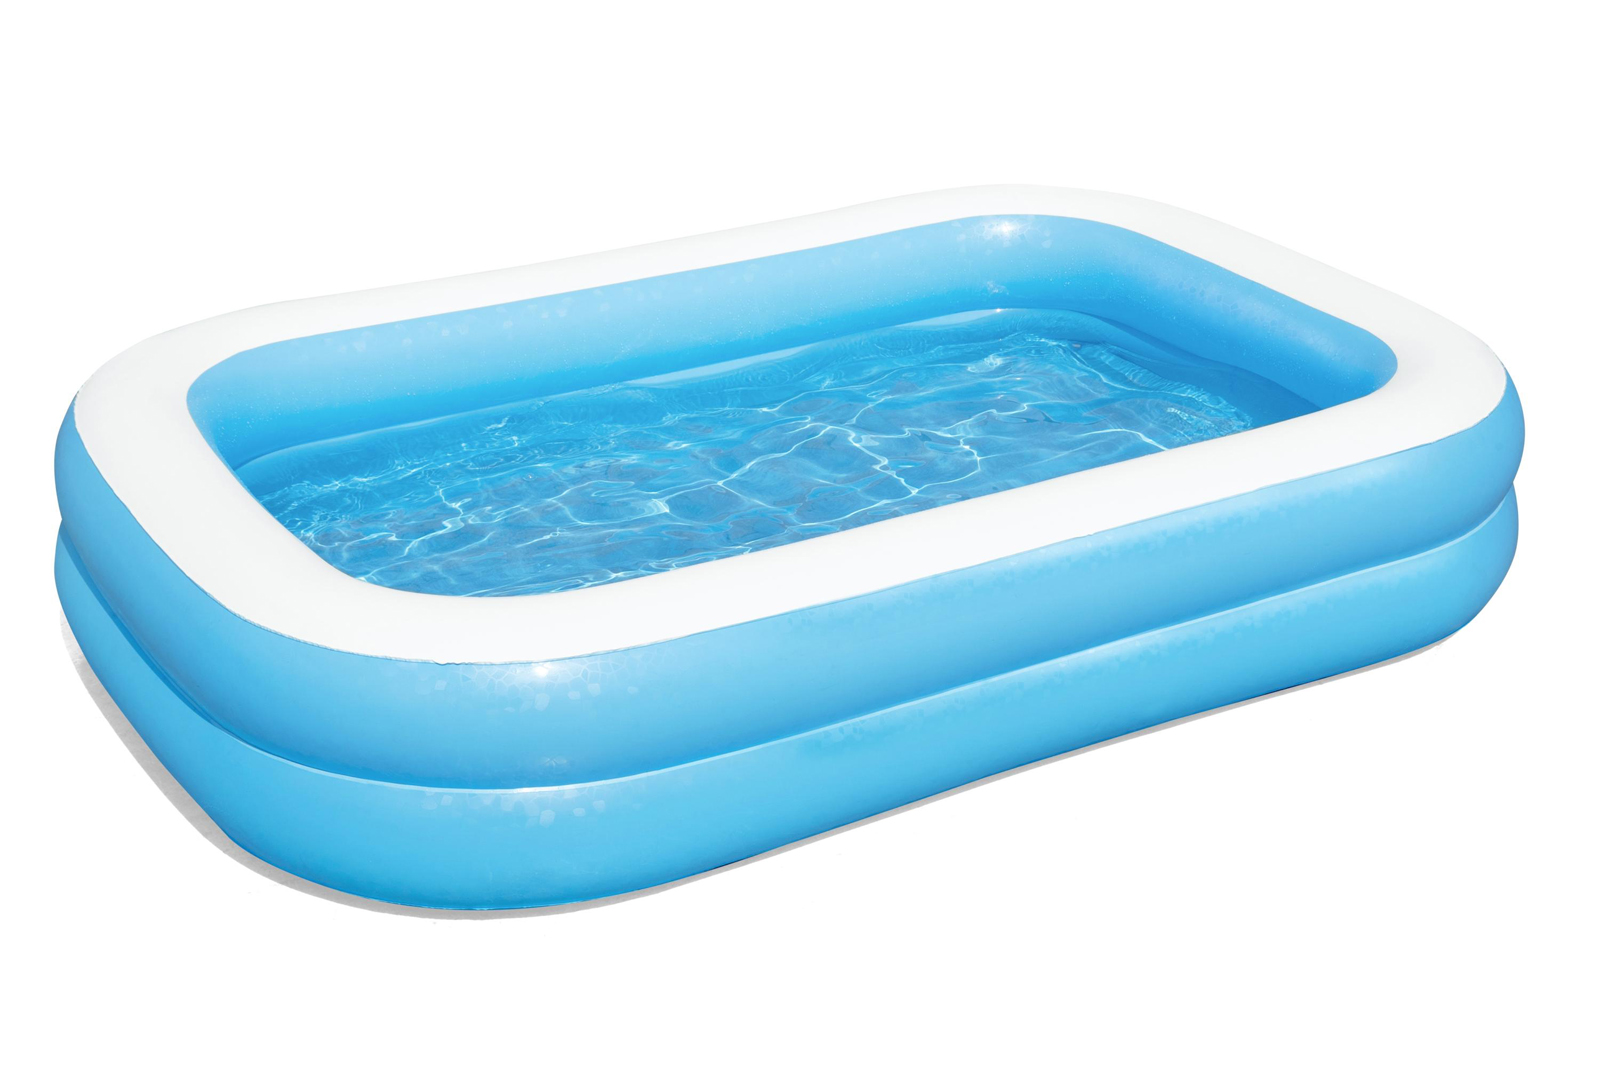 Inflatable Rectangular Family Swimming Pool 262 x 175 x 51 cm Blue for Kids 